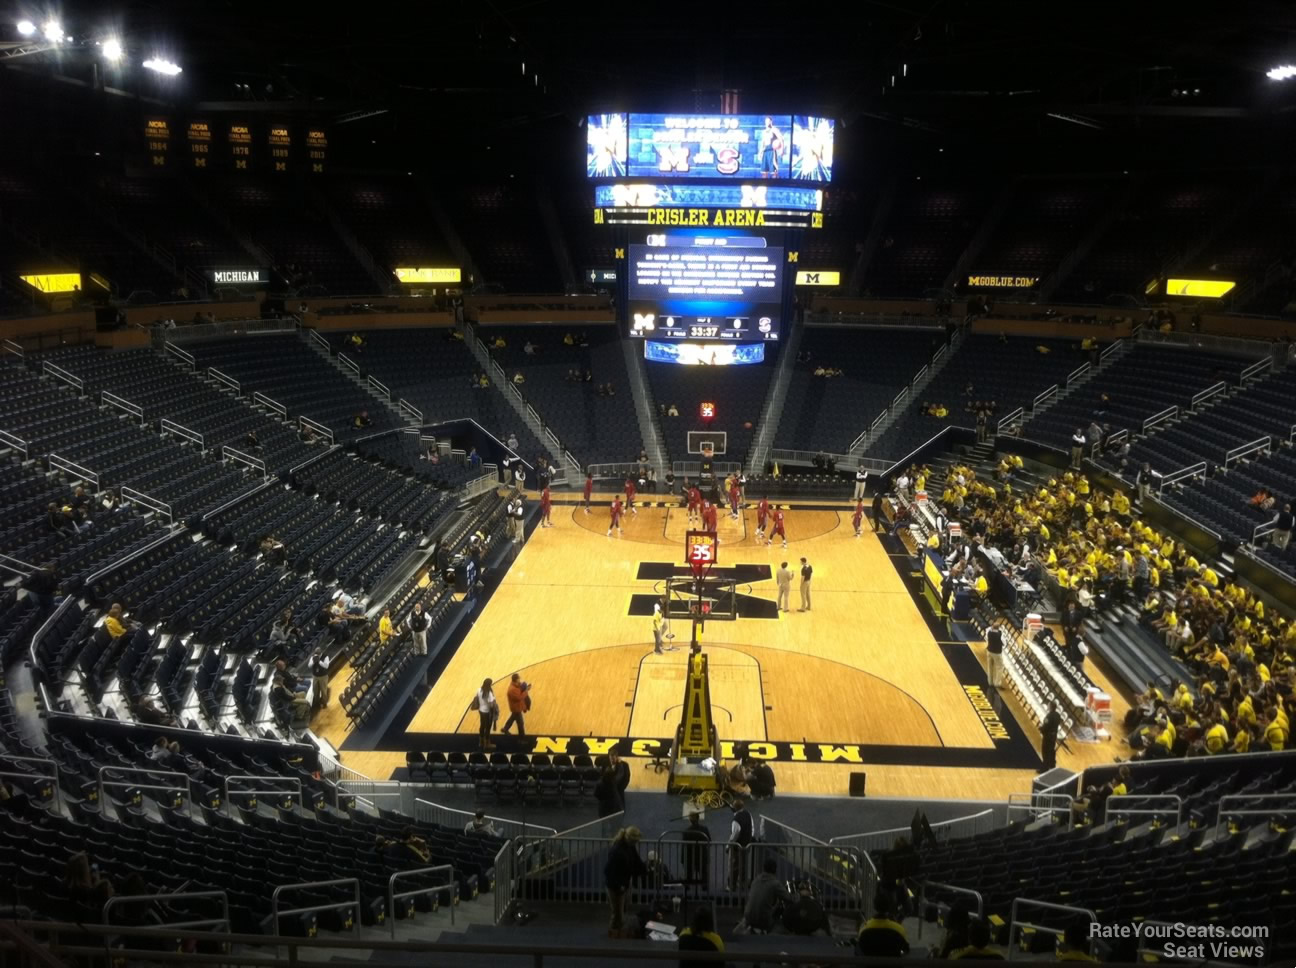 section 232, row 28 seat view  - crisler center